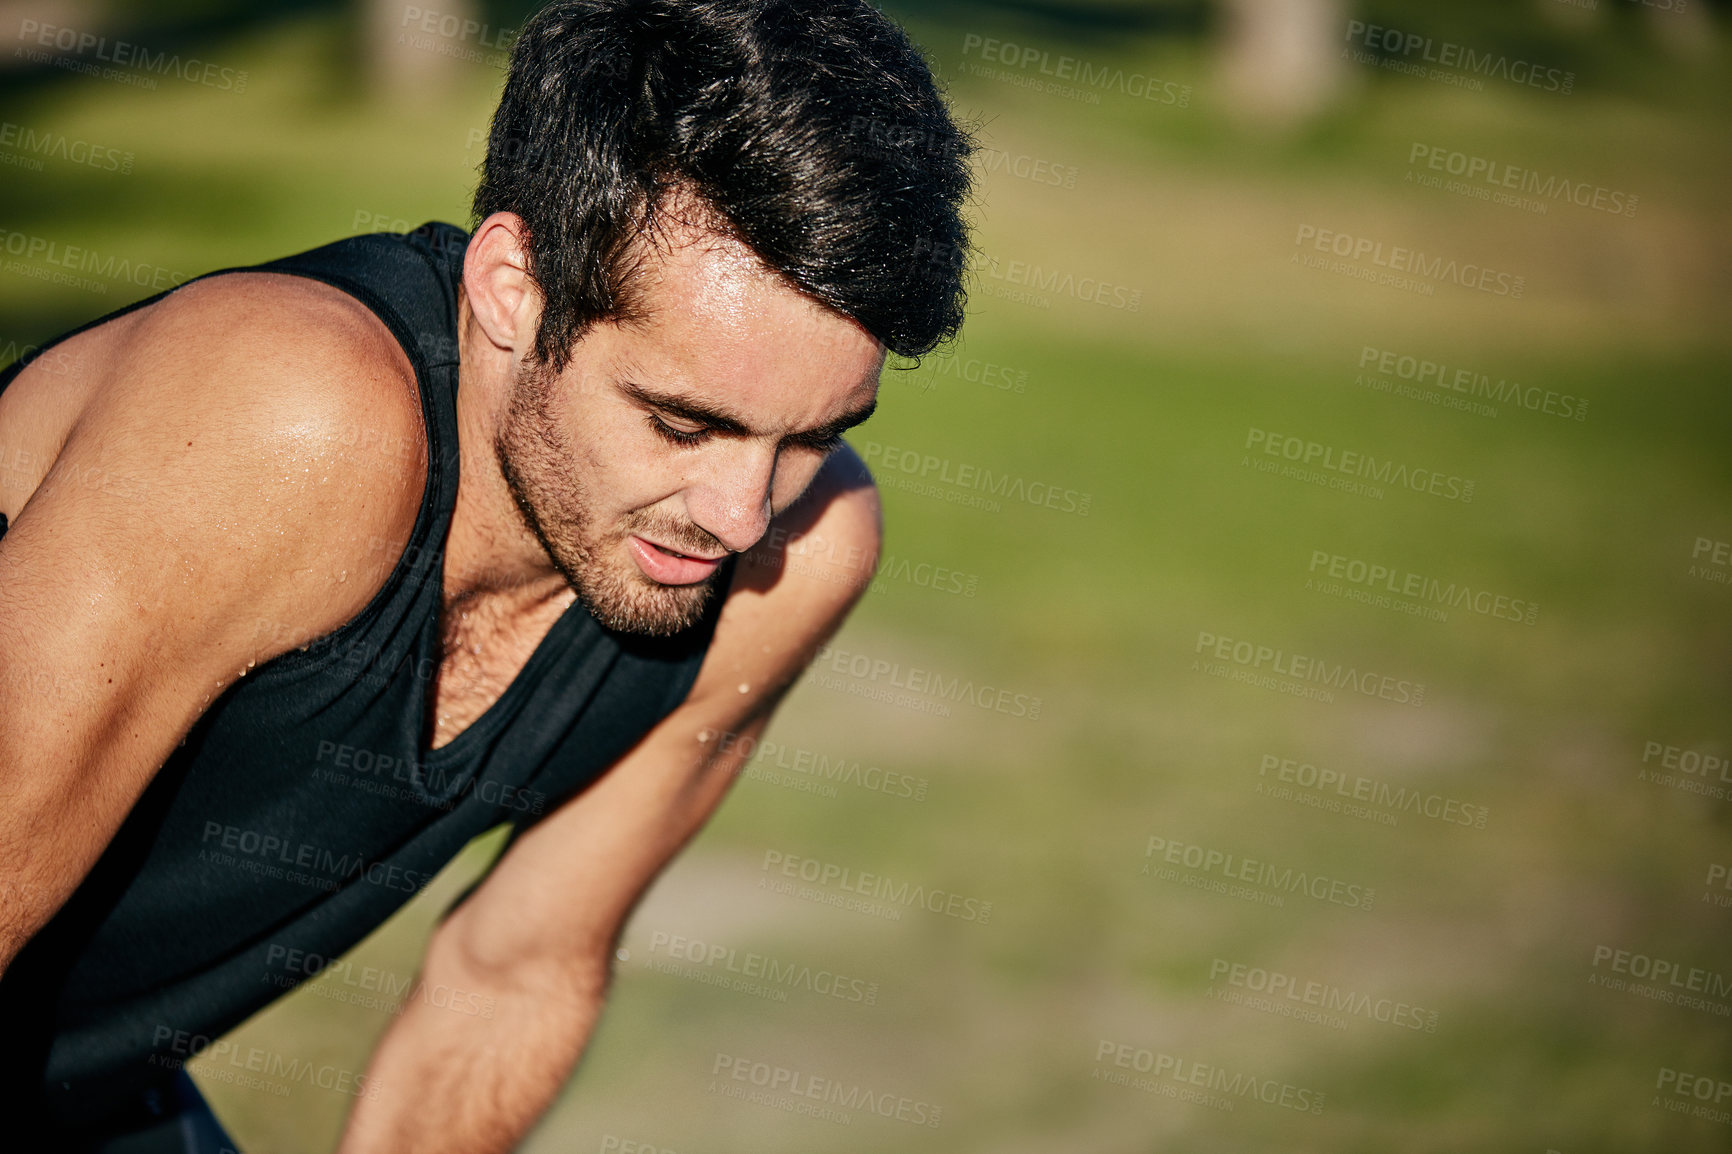 Buy stock photo Shot of a young jogger resting while out for a run in a park